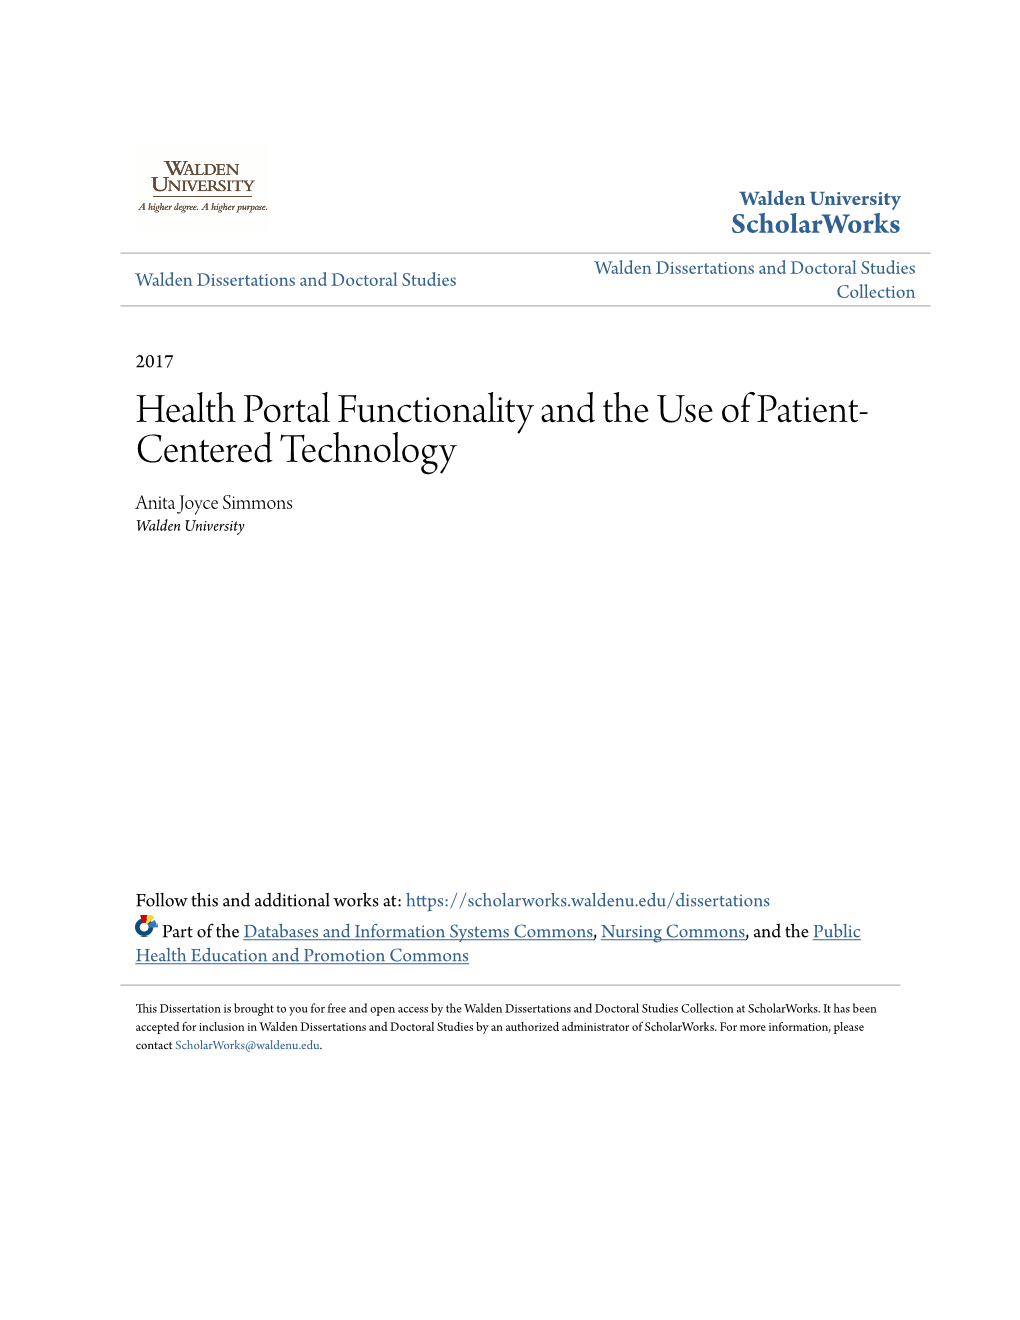 Health Portal Functionality and the Use of Patient-Centered Technology